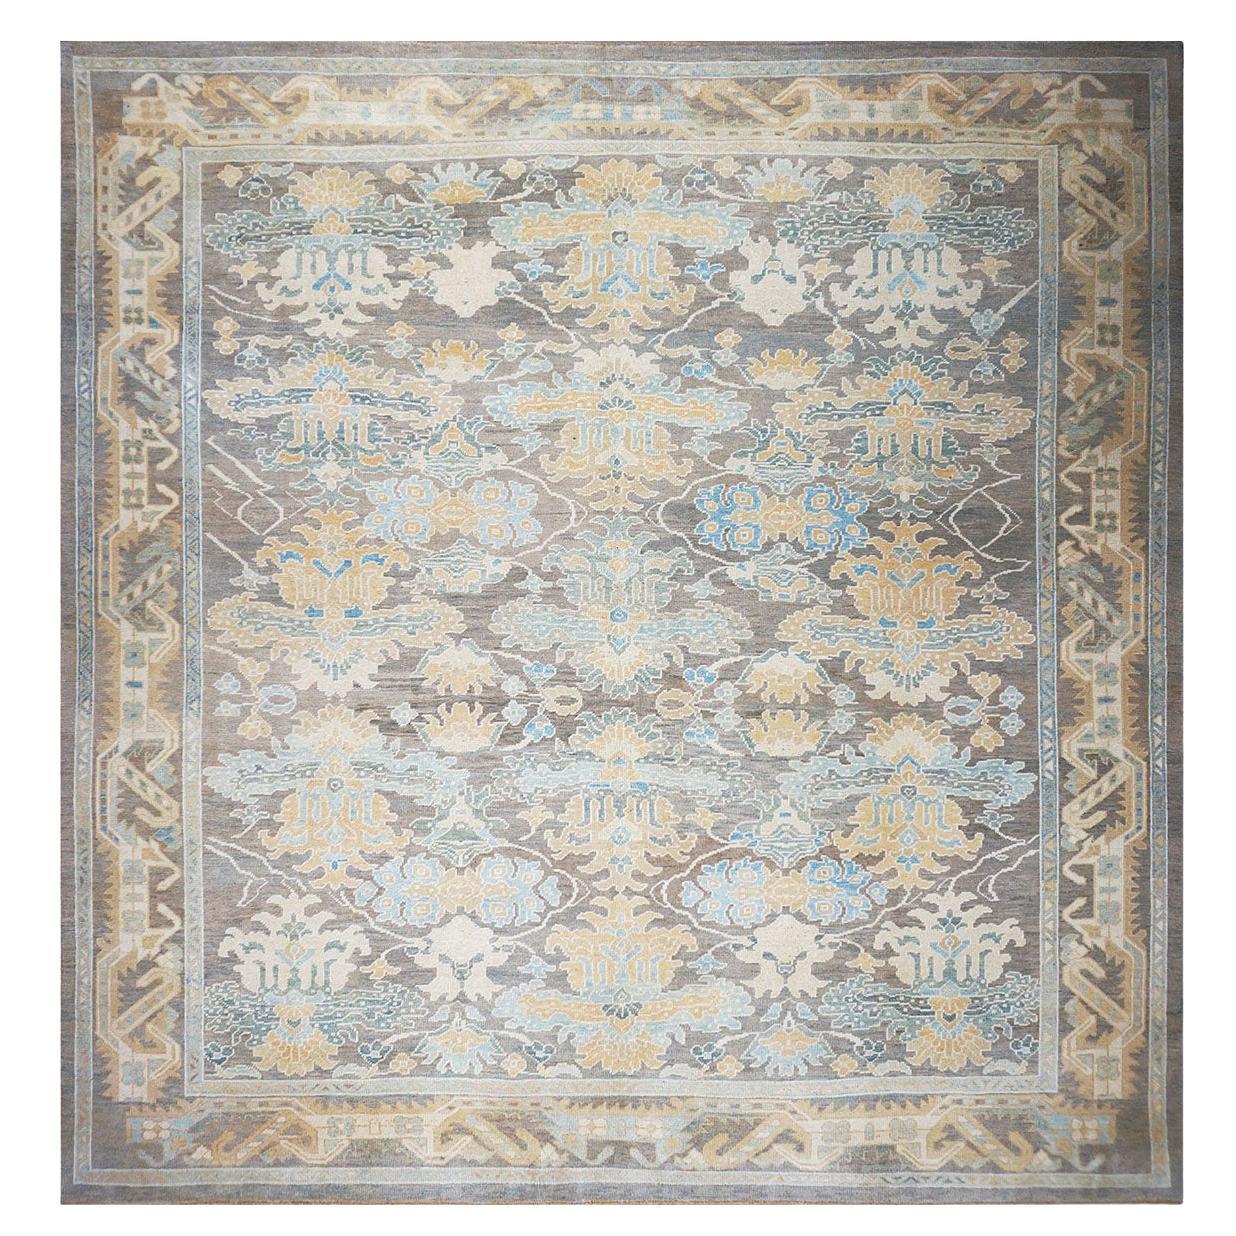 21st Century Turkish Donegal Carpet 12x12 Grey, Blue, and Gold Square Area Rug For Sale